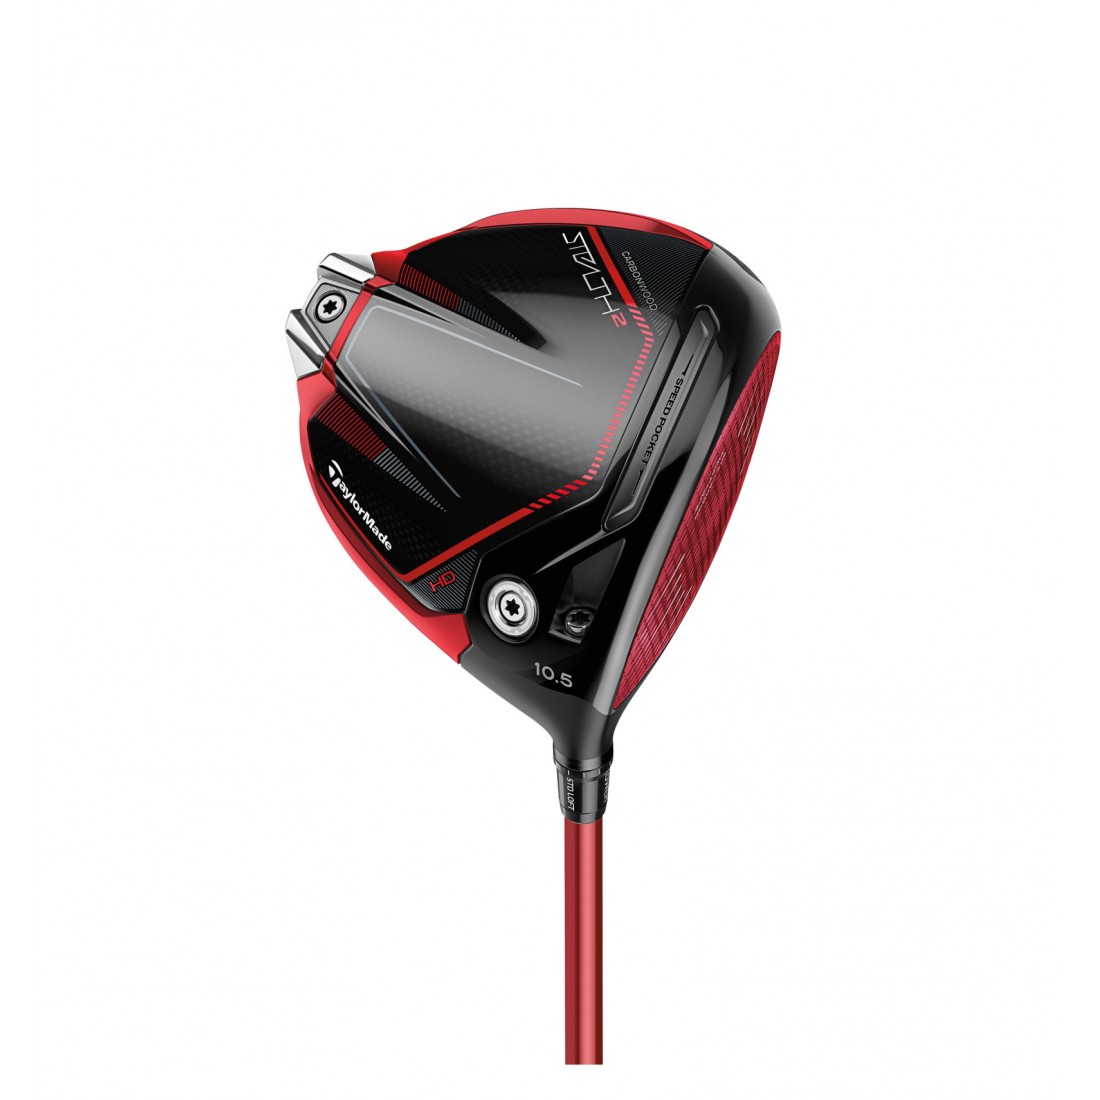 Taylormade driver Stealth 2 HD